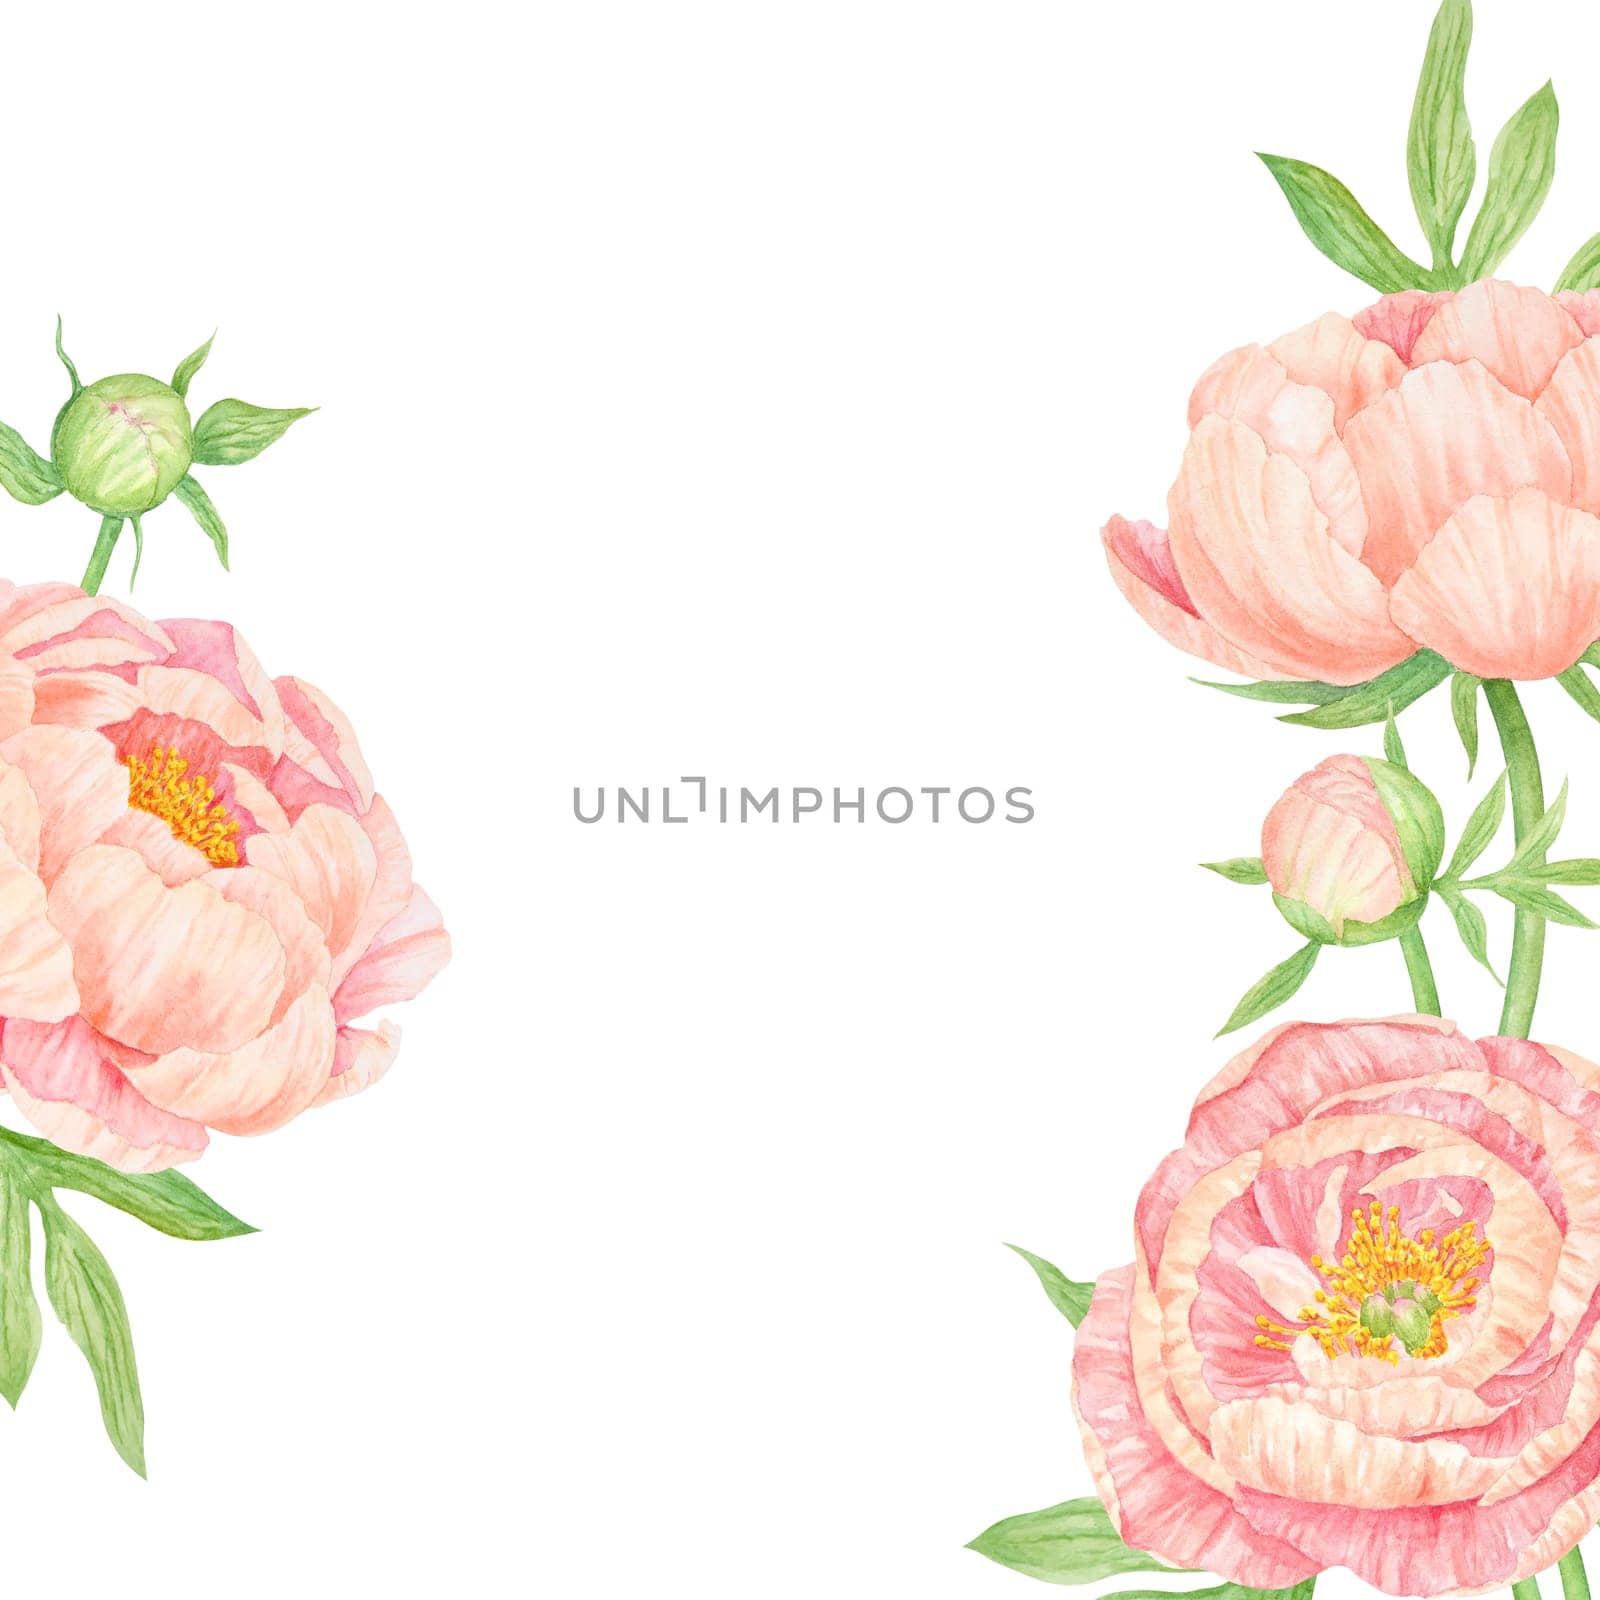 Peach peony bouquet watercolor hand drawn frame. Chinese national symbol illustration. Realistic flower clipart, floral arrangement for card design, wedding invitation, prints, textile, packing by florainlove_art